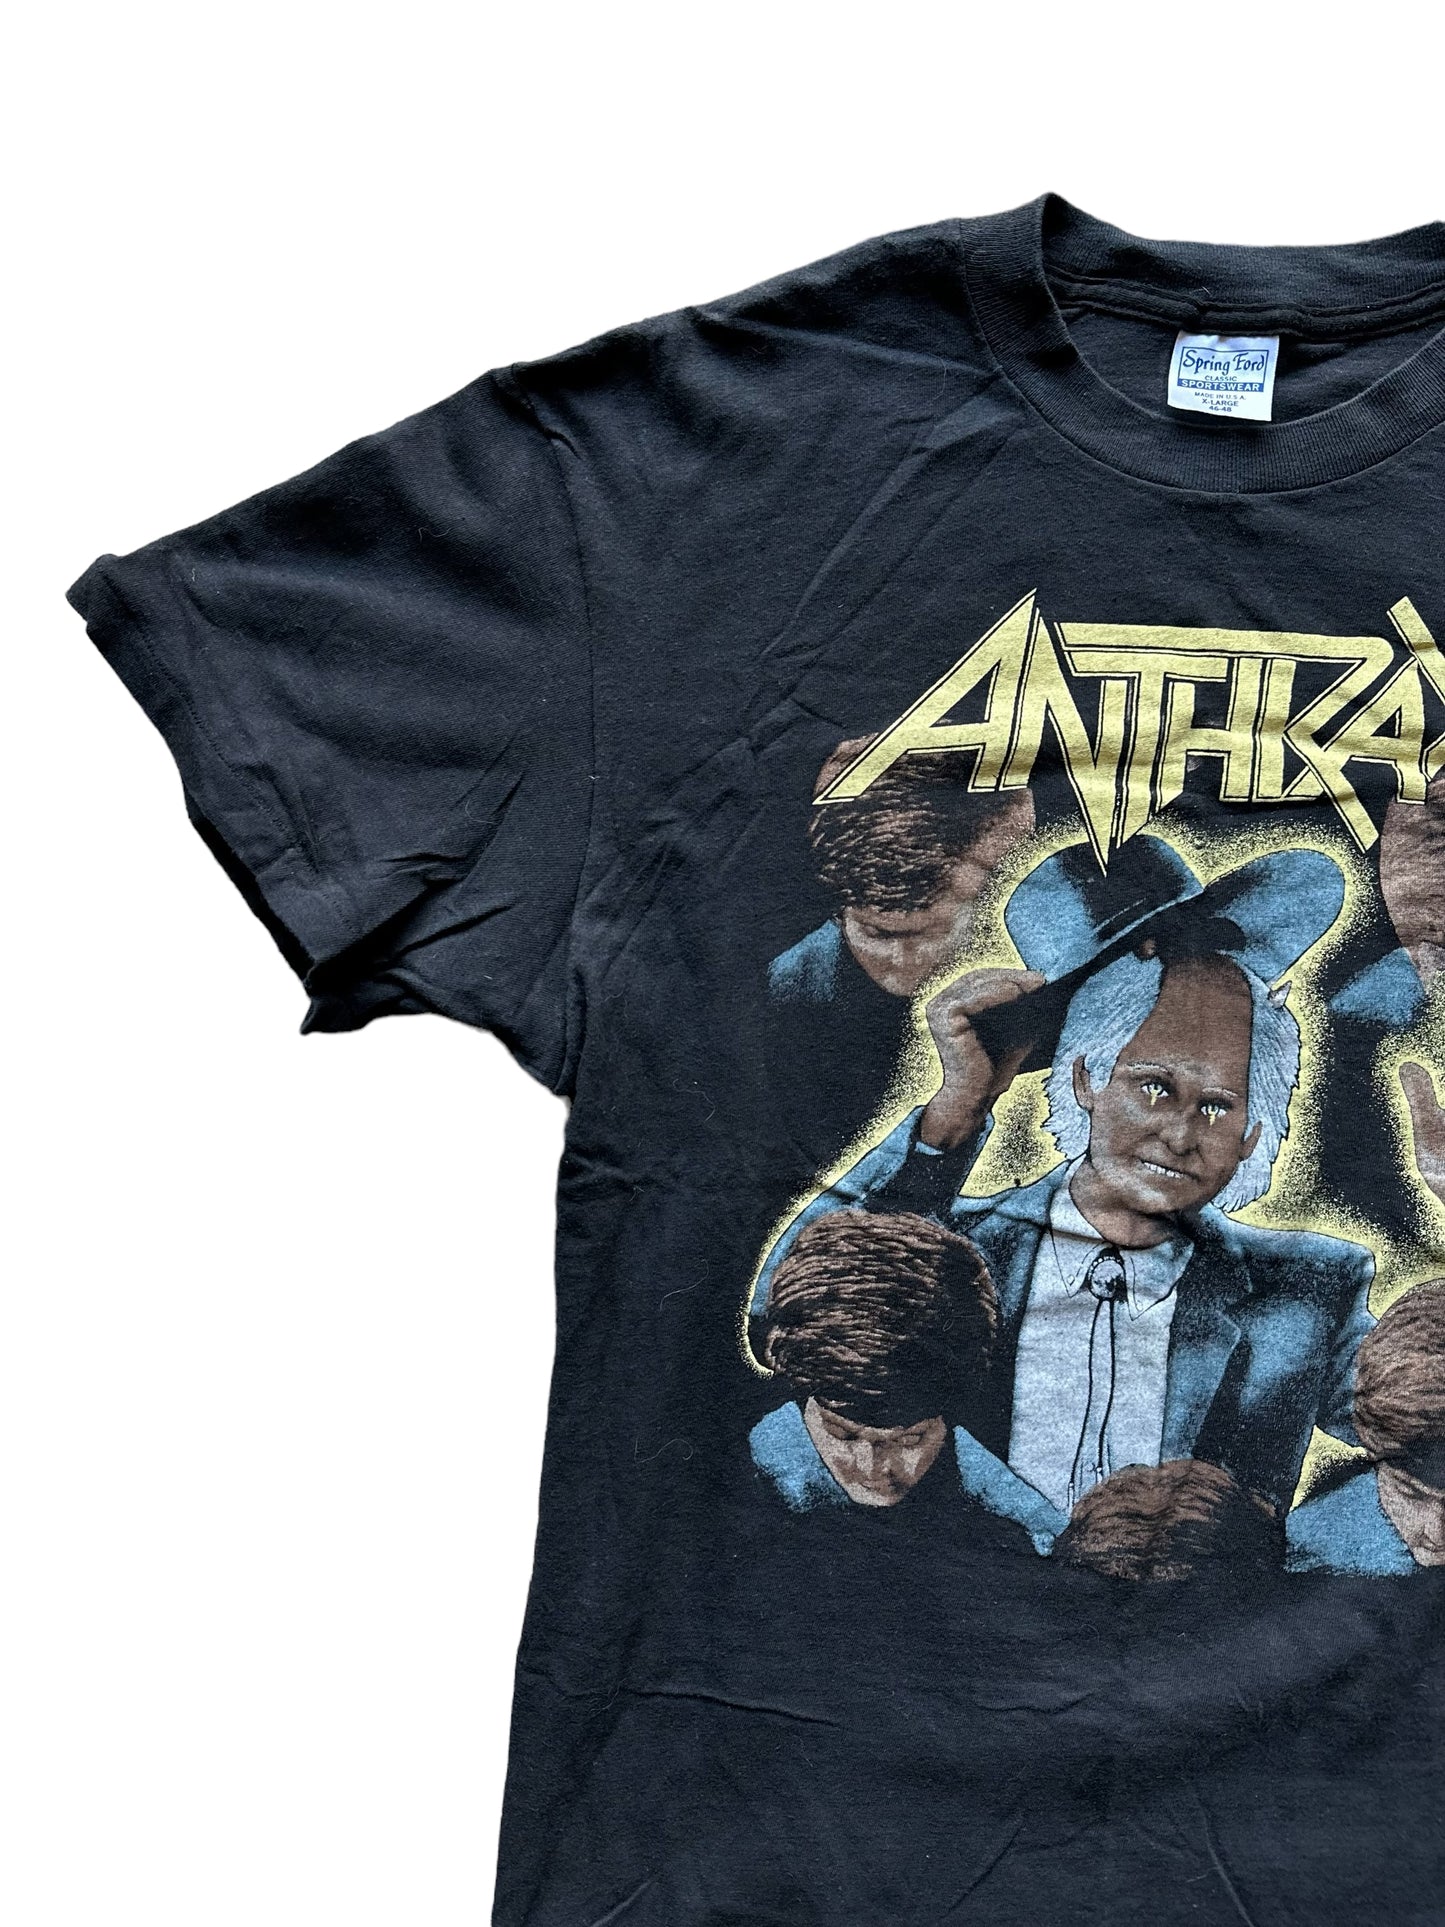 Right Single Stitch Sleeve View on Vintage Anthrax Among the Living Tour Shirt Size XL |  Barn Owl Vintage | Vintage Rock Tee